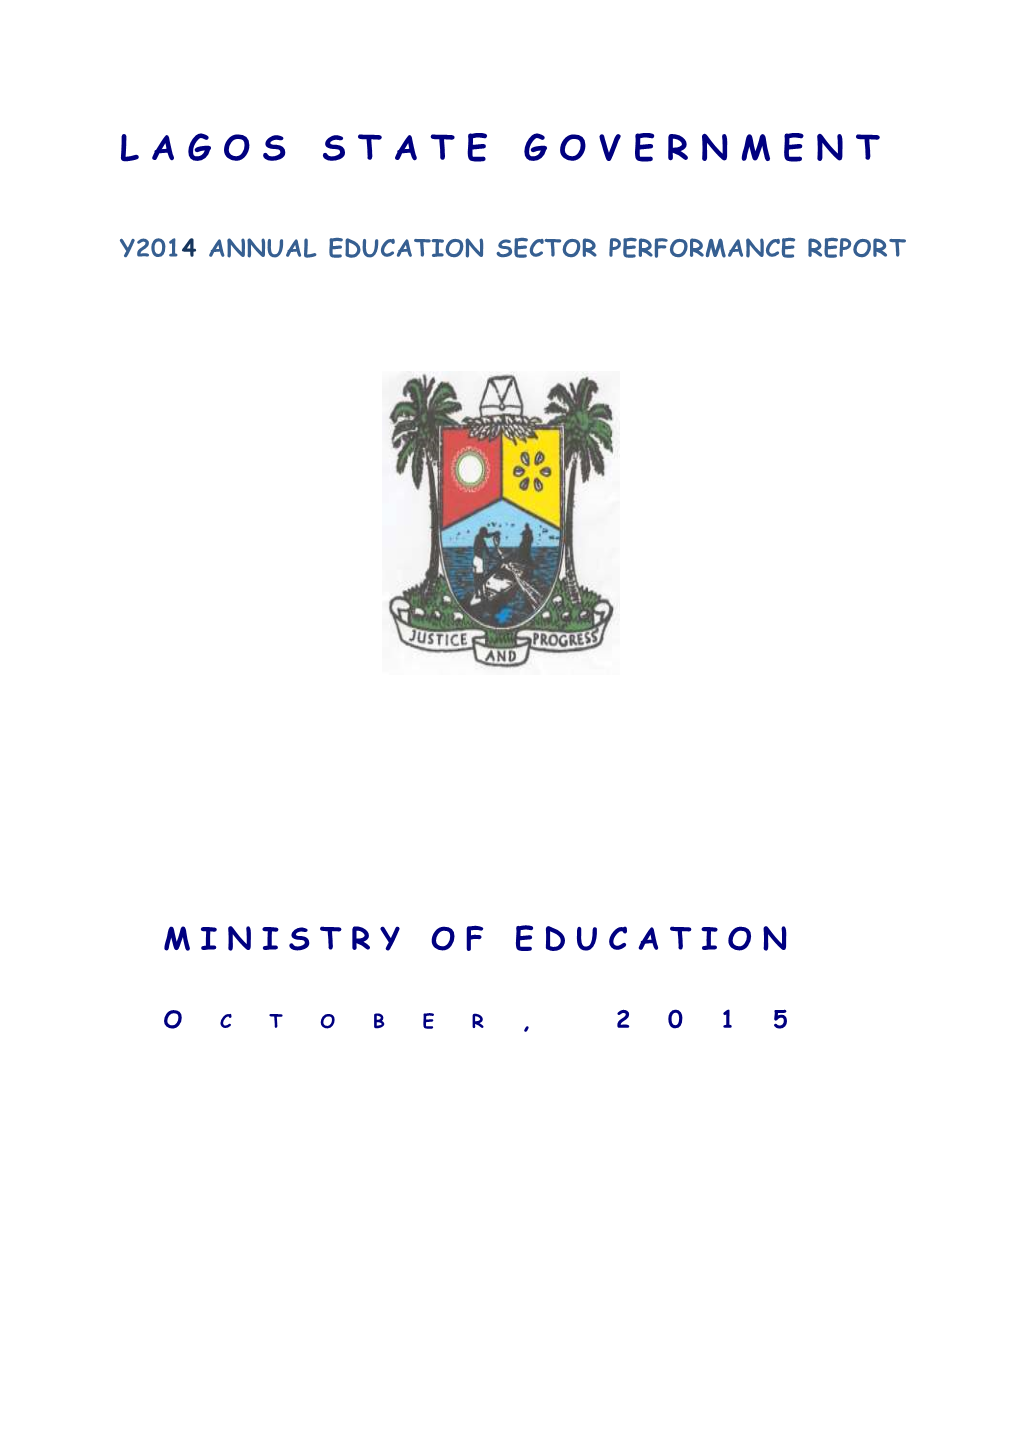 Lagos Annual Education Sector Performance Report 2014